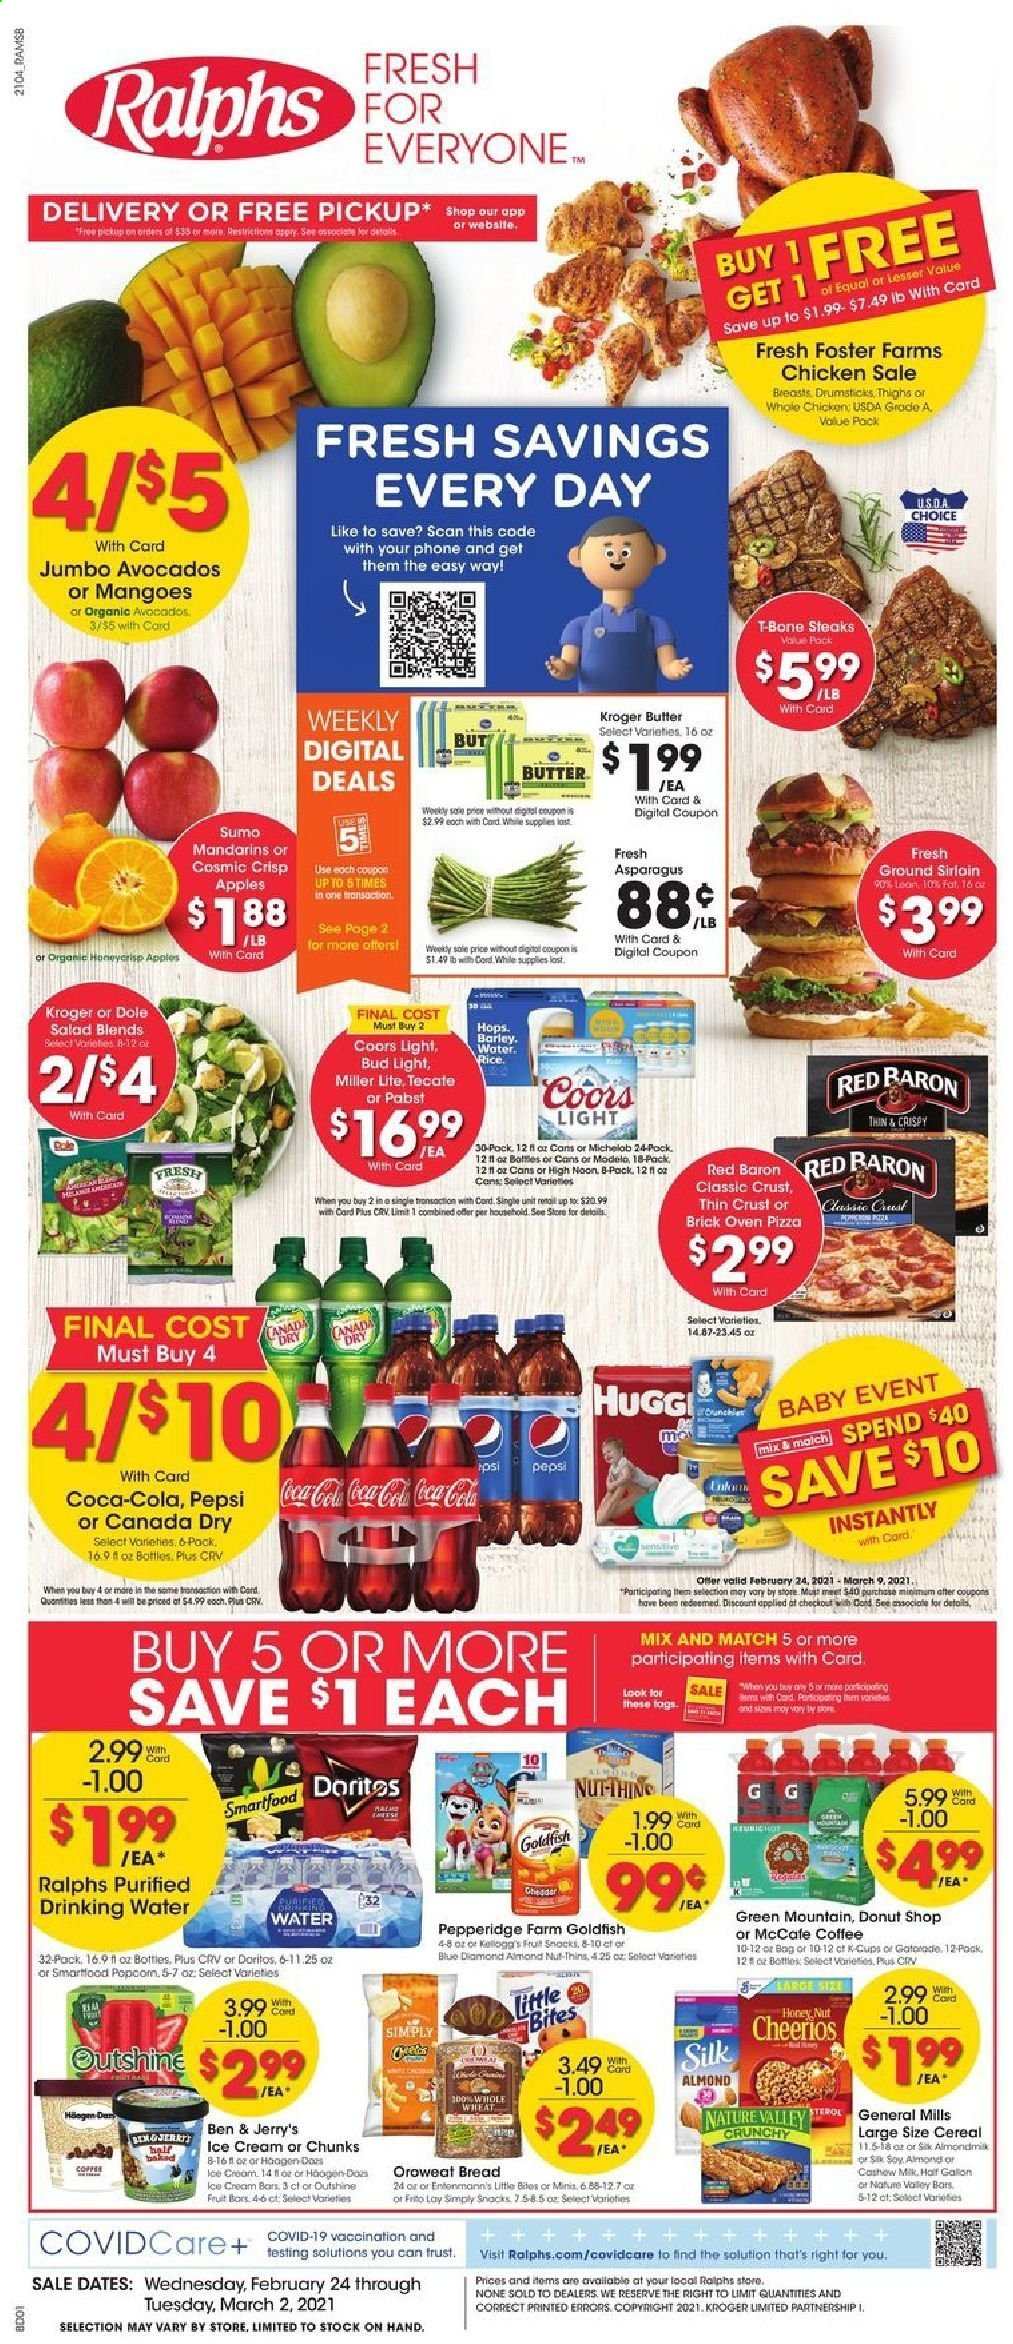 thumbnail - Ralphs Flyer - 02/24/2021 - 03/02/2021 - Sales products - Trust, Dole, bread, Little Bites, apples, pizza, salad, Silk, butter, ice cream, Ben & Jerry's, mango, Red Baron, Doritos, snack, Smartfood, Thins, Goldfish, mandarines, cereals, Cheerios, almonds, Blue Diamond, Canada Dry, Coca-Cola, Pepsi, coffee, coffee capsules, L'Or, K-Cups, Green Mountain, beer, Miller Lite, Coors, Bud Light, Modelo, whole chicken, beef meat, t-bone steak, steak, Lee. Page 1.